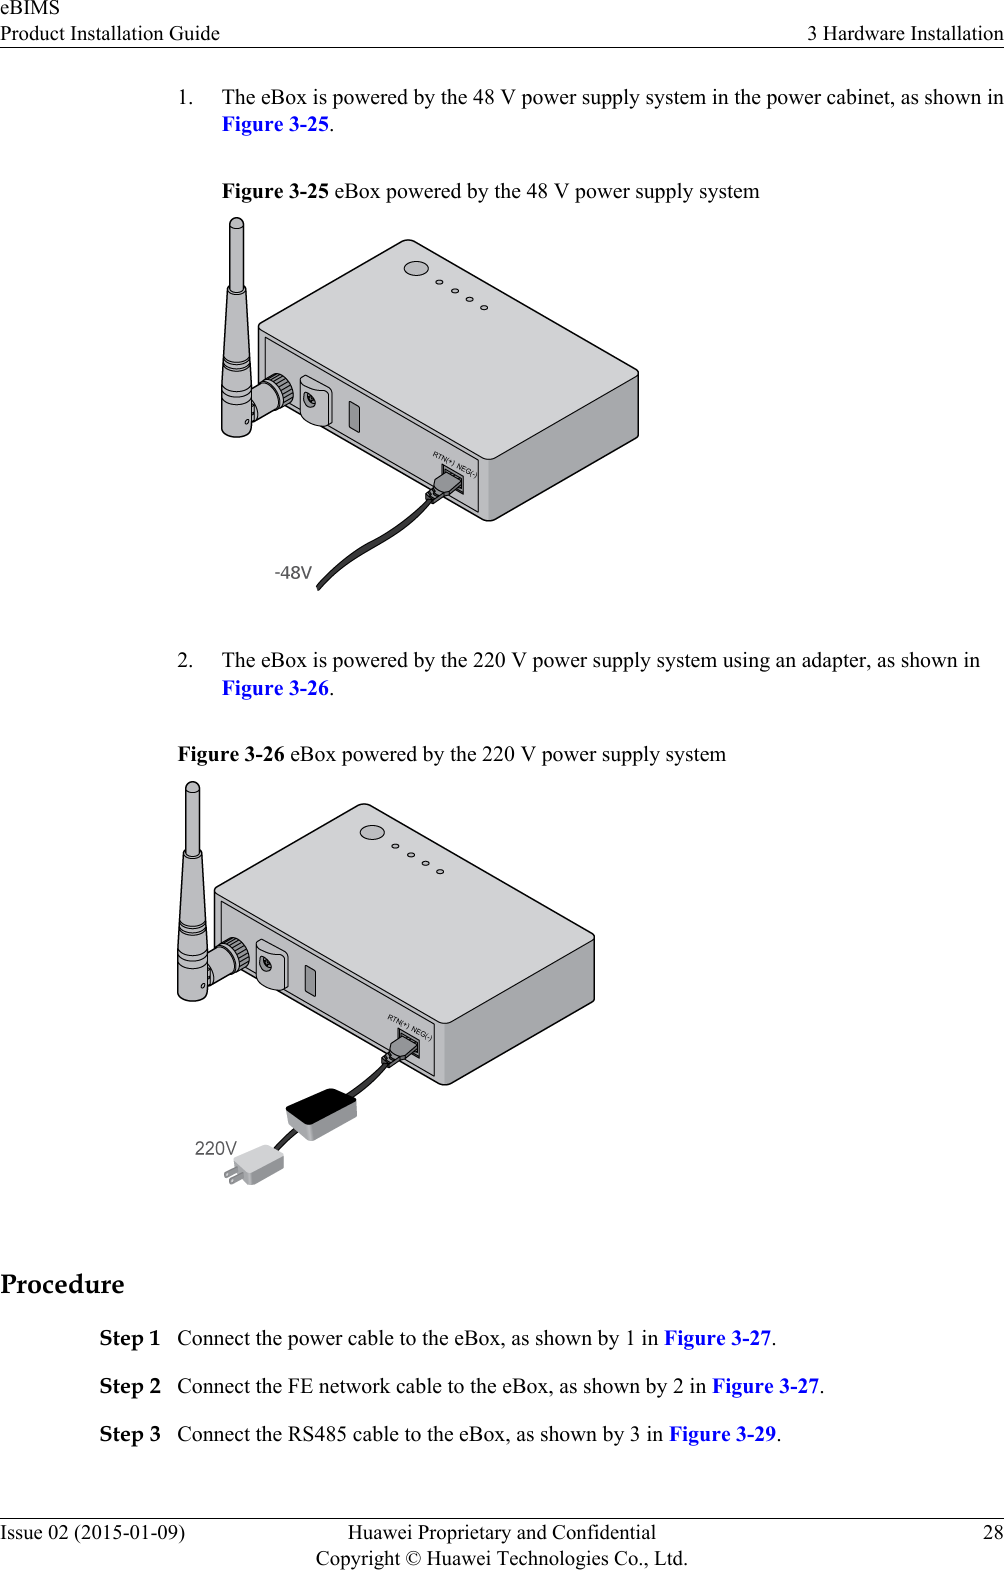 1. The eBox is powered by the 48 V power supply system in the power cabinet, as shown inFigure 3-25.Figure 3-25 eBox powered by the 48 V power supply system2. The eBox is powered by the 220 V power supply system using an adapter, as shown inFigure 3-26.Figure 3-26 eBox powered by the 220 V power supply systemProcedureStep 1 Connect the power cable to the eBox, as shown by 1 in Figure 3-27.Step 2 Connect the FE network cable to the eBox, as shown by 2 in Figure 3-27.Step 3 Connect the RS485 cable to the eBox, as shown by 3 in Figure 3-29.eBIMSProduct Installation Guide 3 Hardware InstallationIssue 02 (2015-01-09) Huawei Proprietary and ConfidentialCopyright © Huawei Technologies Co., Ltd.28